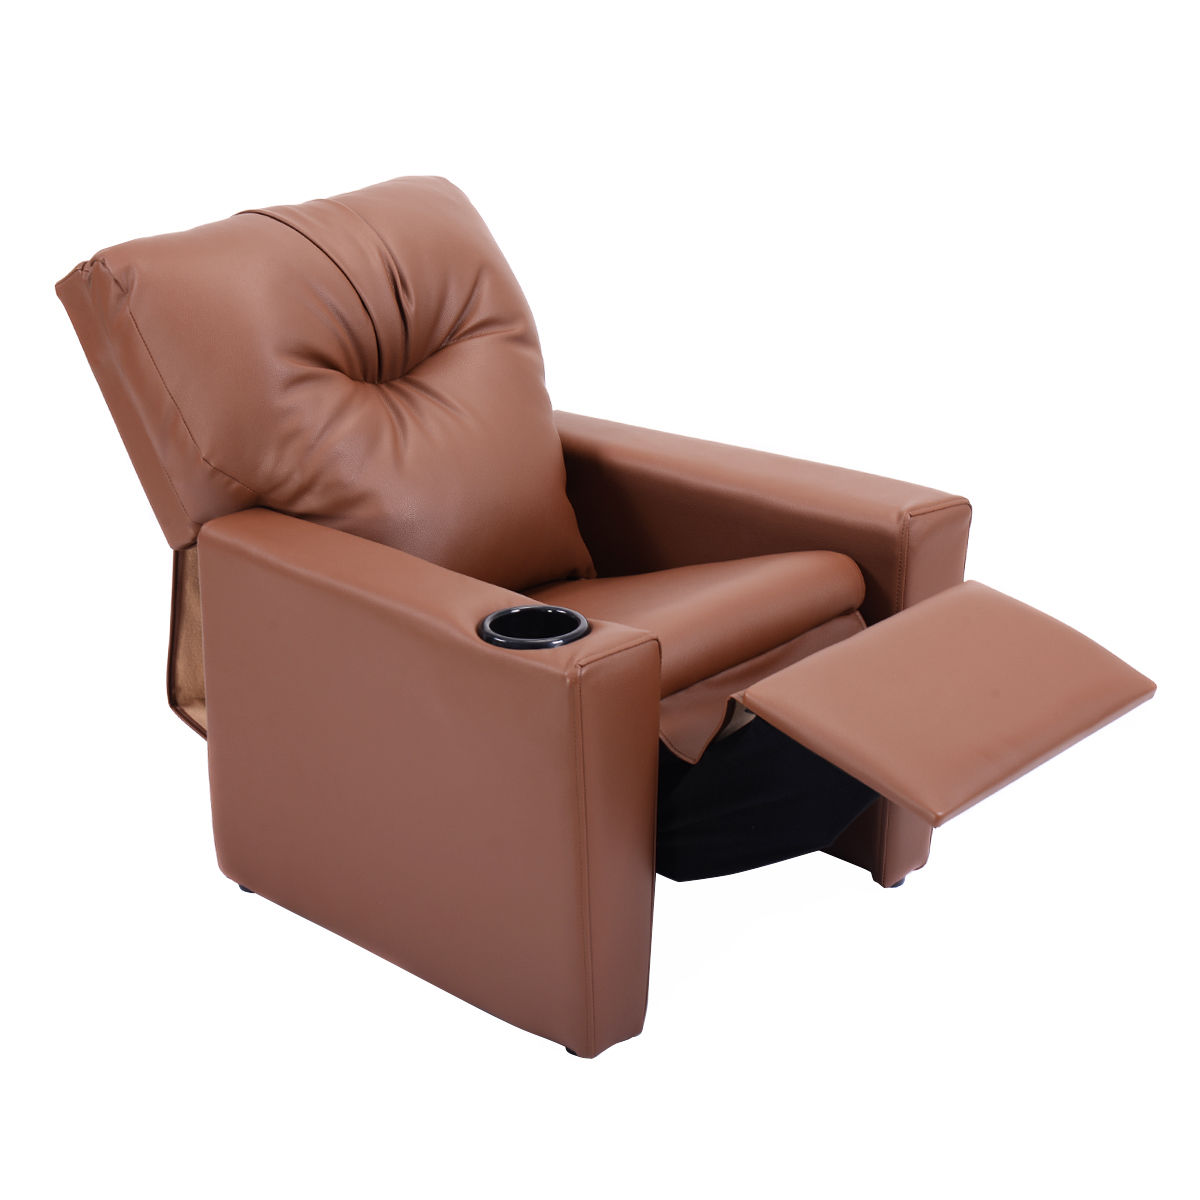 childrens leather recliner